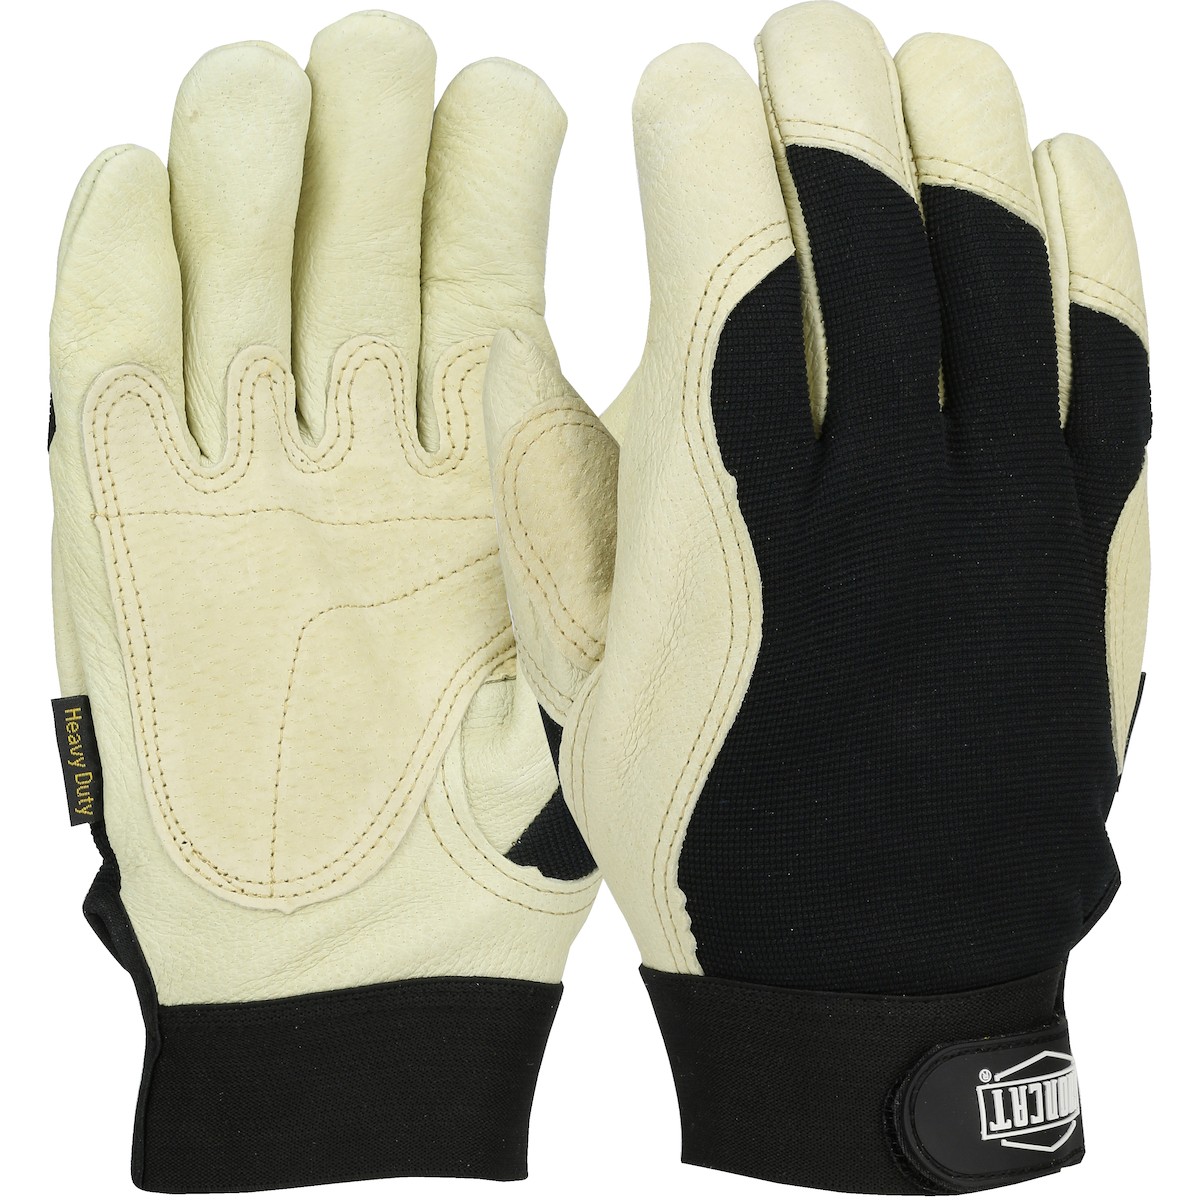 Ironcat® Reinforced Top Grain Pigskin Leather Palm Glove with 3M™ Thinsulate™ Lining-Spandex Back  (#86355)